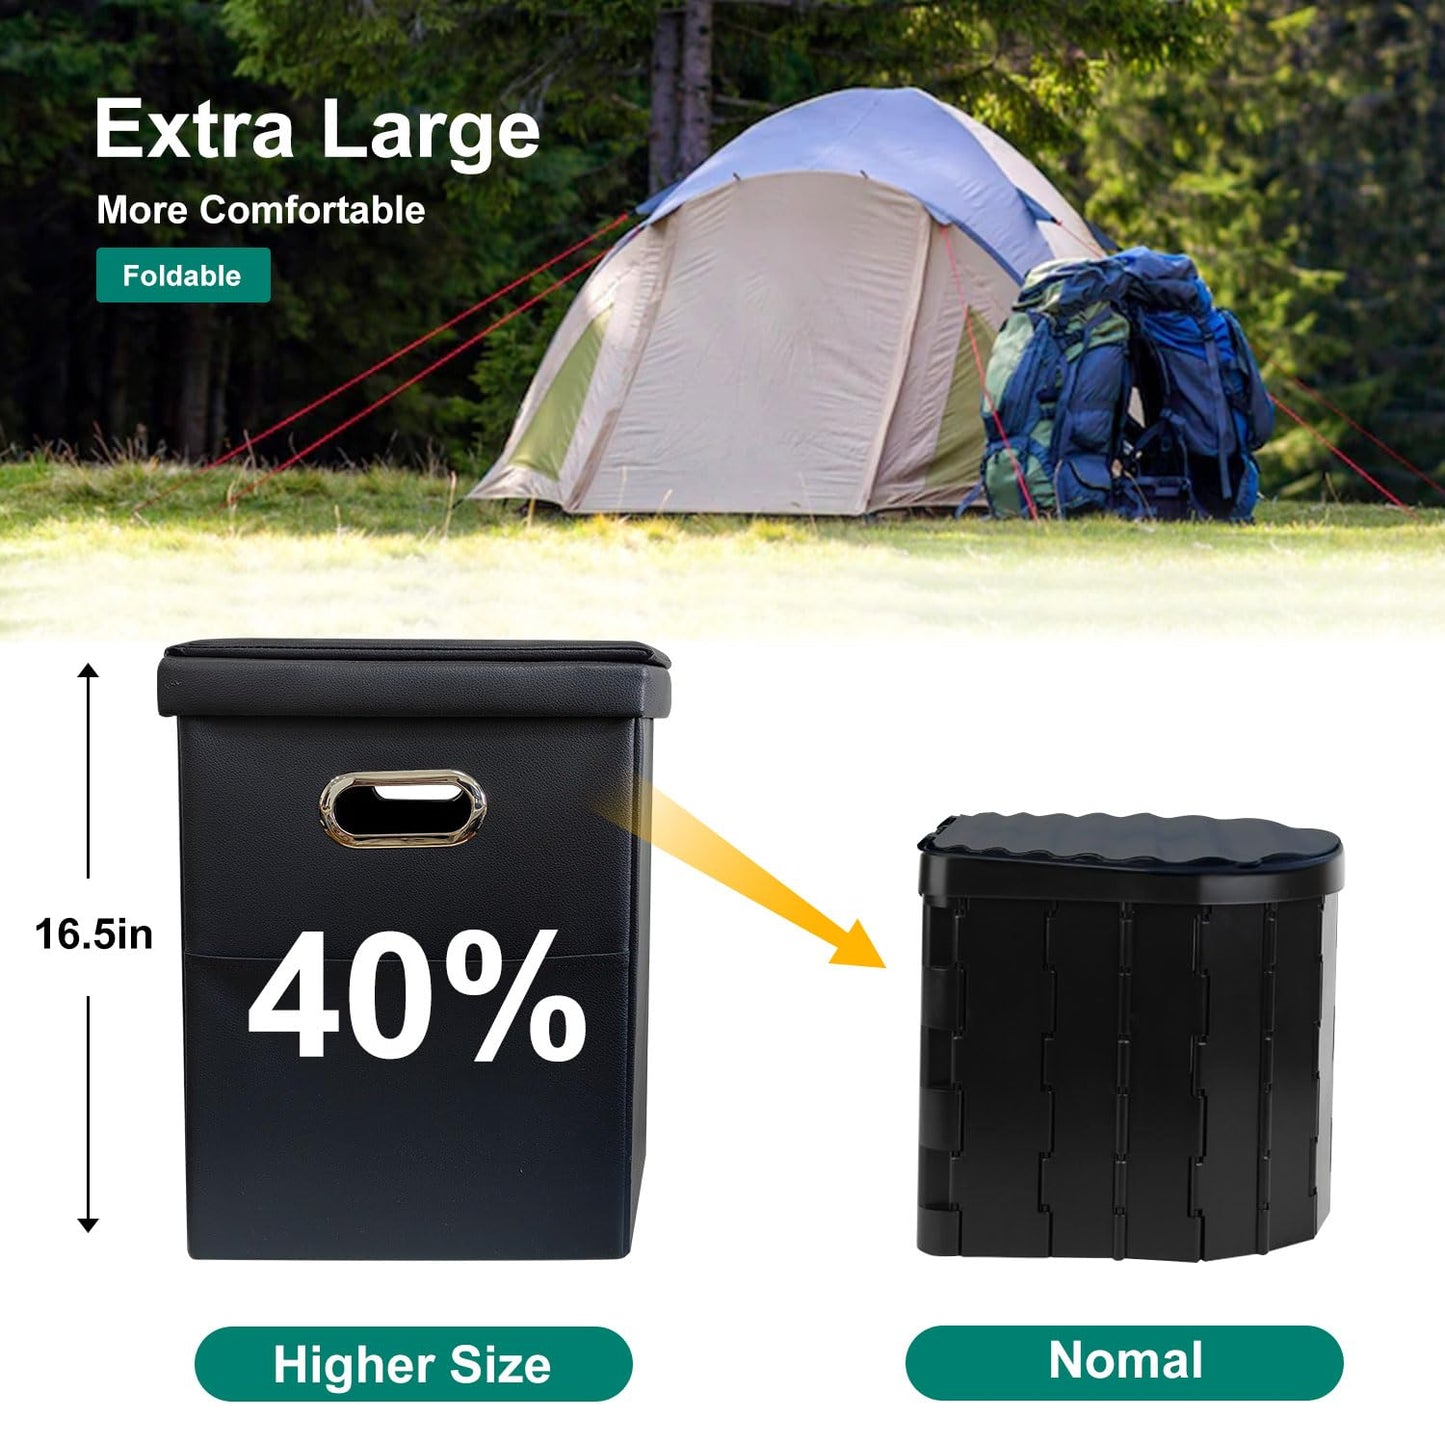 Ann Katy Upgrade XL Portable Toilet for Adults, Extra Large Portable Travel Floding Toilet, Camping Tall Toilets with Lid for Adults and Kids Compact Potty for Car,Hiking,Beach -Leather,Density board